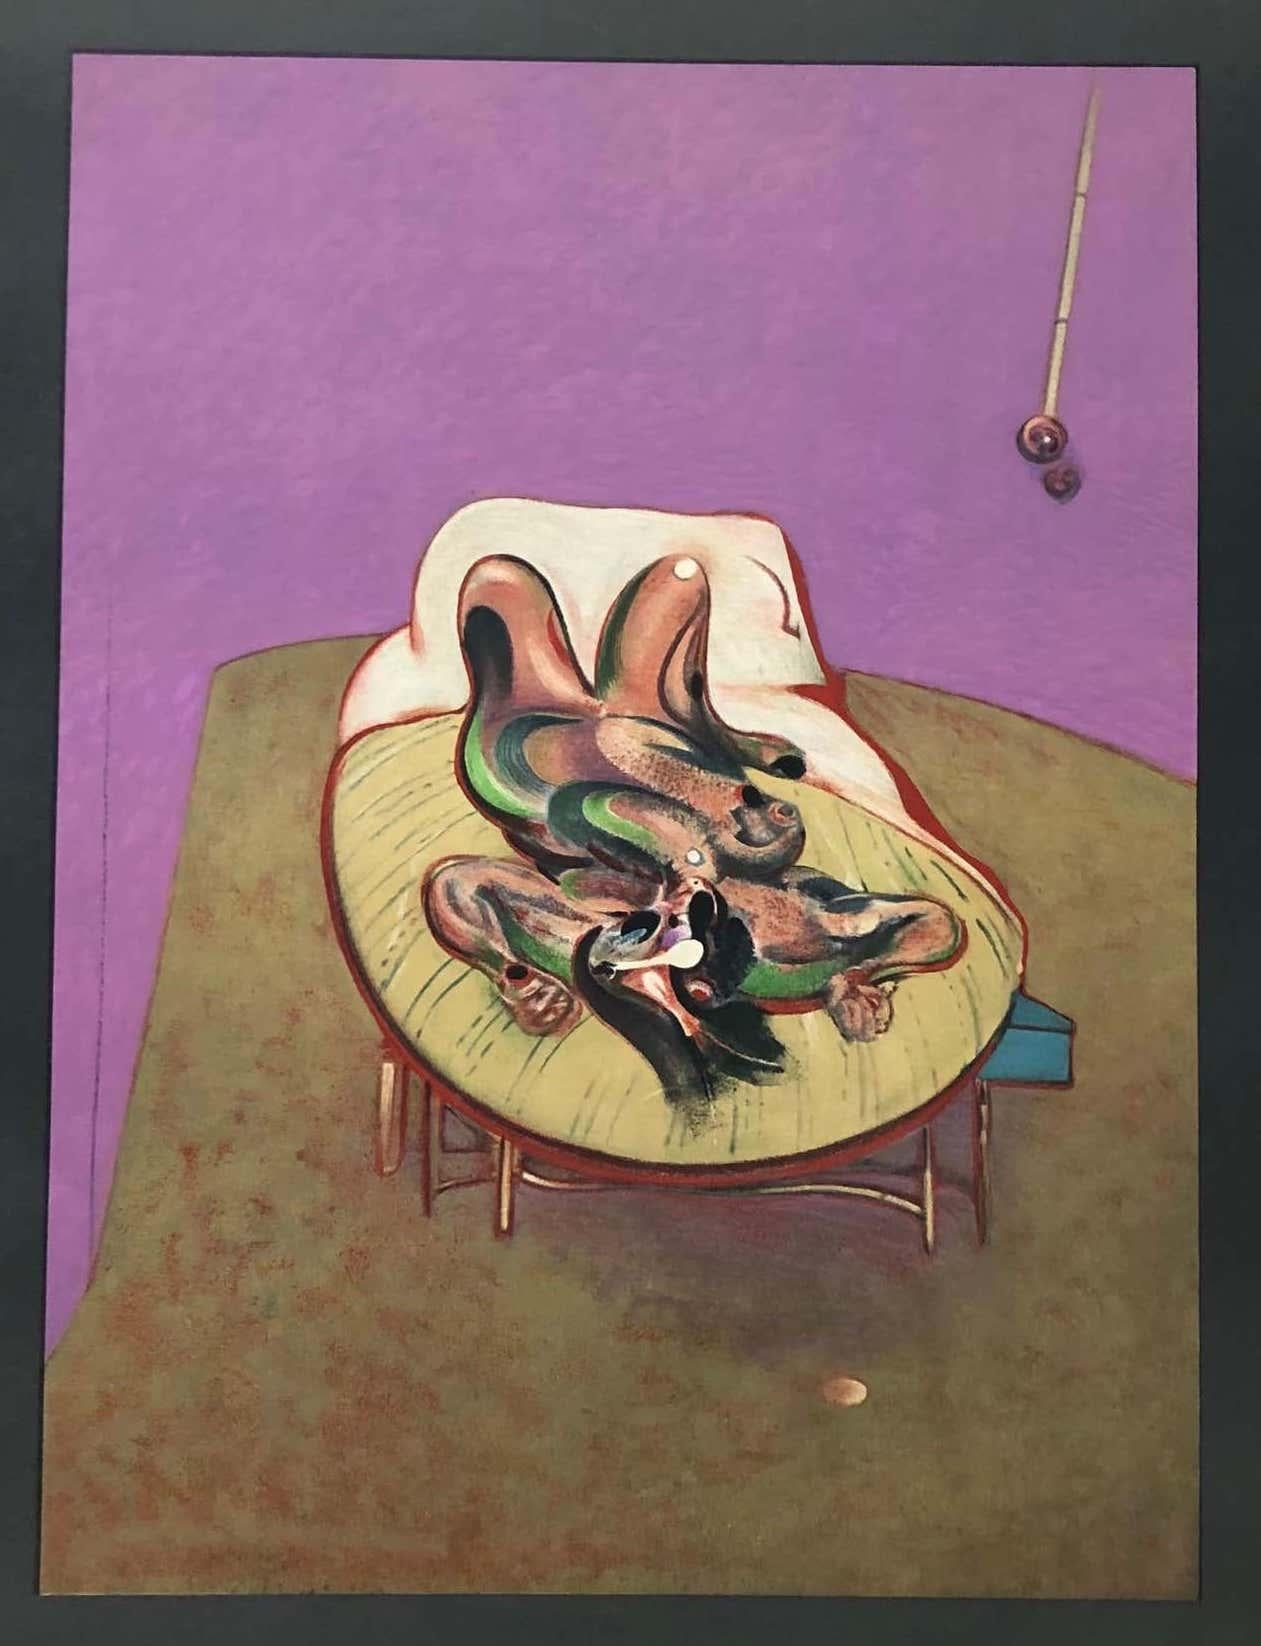 Francis Bacon Paris, 1967
Vintage Francis Bacon exhibition poster circa late 1960s published on the occasion of: Francis Bacon at the Galerie Maeght 13 rue de Teheran 1967.

Offset lithograph.
Dimensions: 27.25 x 17.75 inches.
Minor signs of